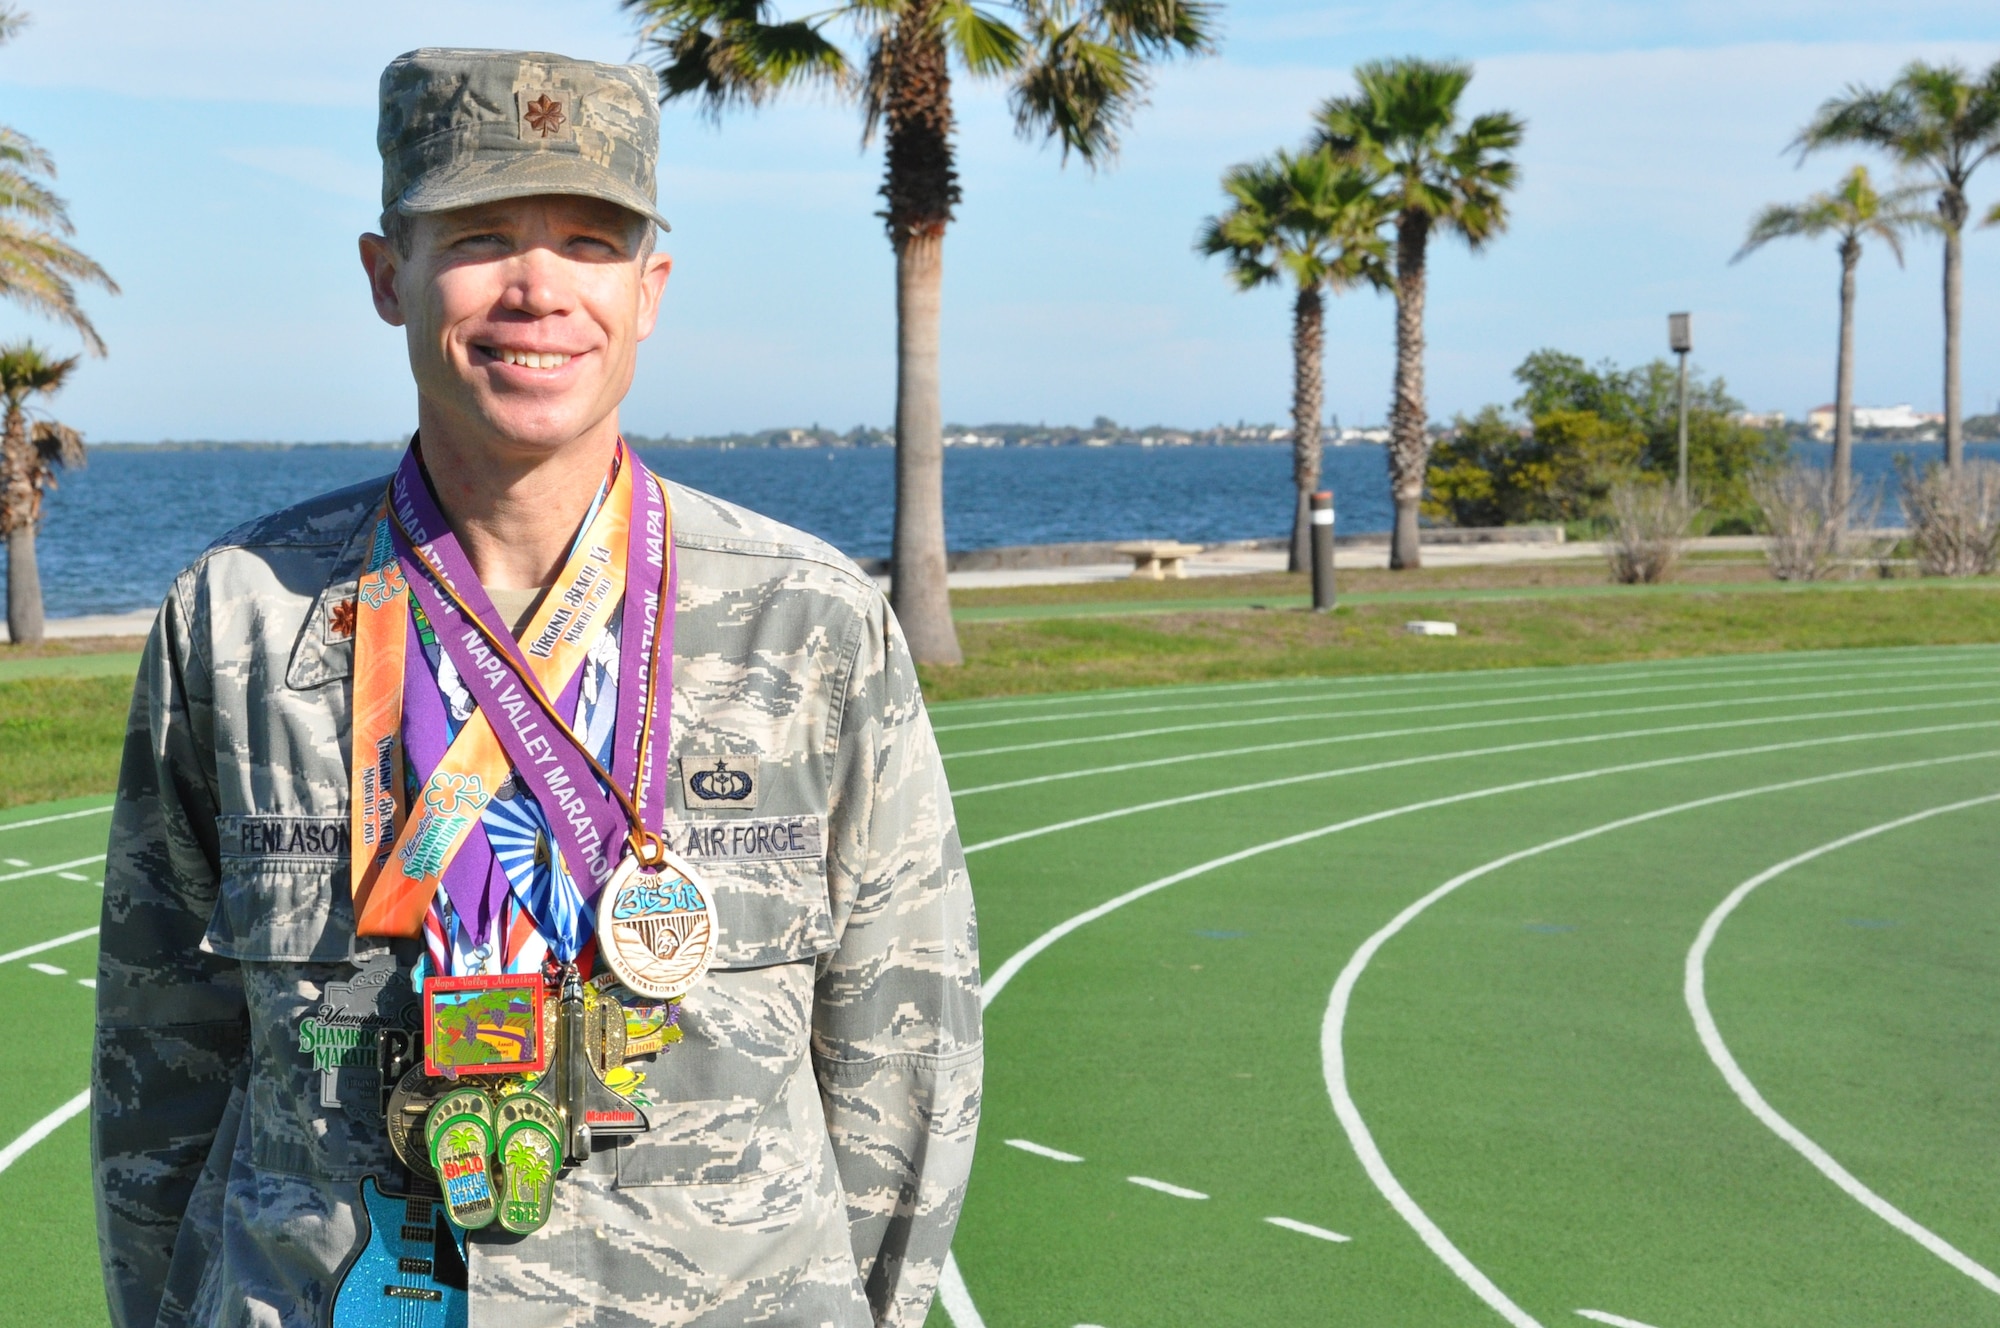 Maj. Joel Fenlason, 45th Space Wing deputy director of staff, displays some of the medals he has earned for running marathons over the past 9 years. He started running marathons in 2005 when he was 31 years old. His goal was to complete 50 marathons by his 40th birthday. Now 40, he is preparing to run his 75th marathon Feb. 16. (U.S. Air Force Photo/Tech. Sgt. Erin Smith)